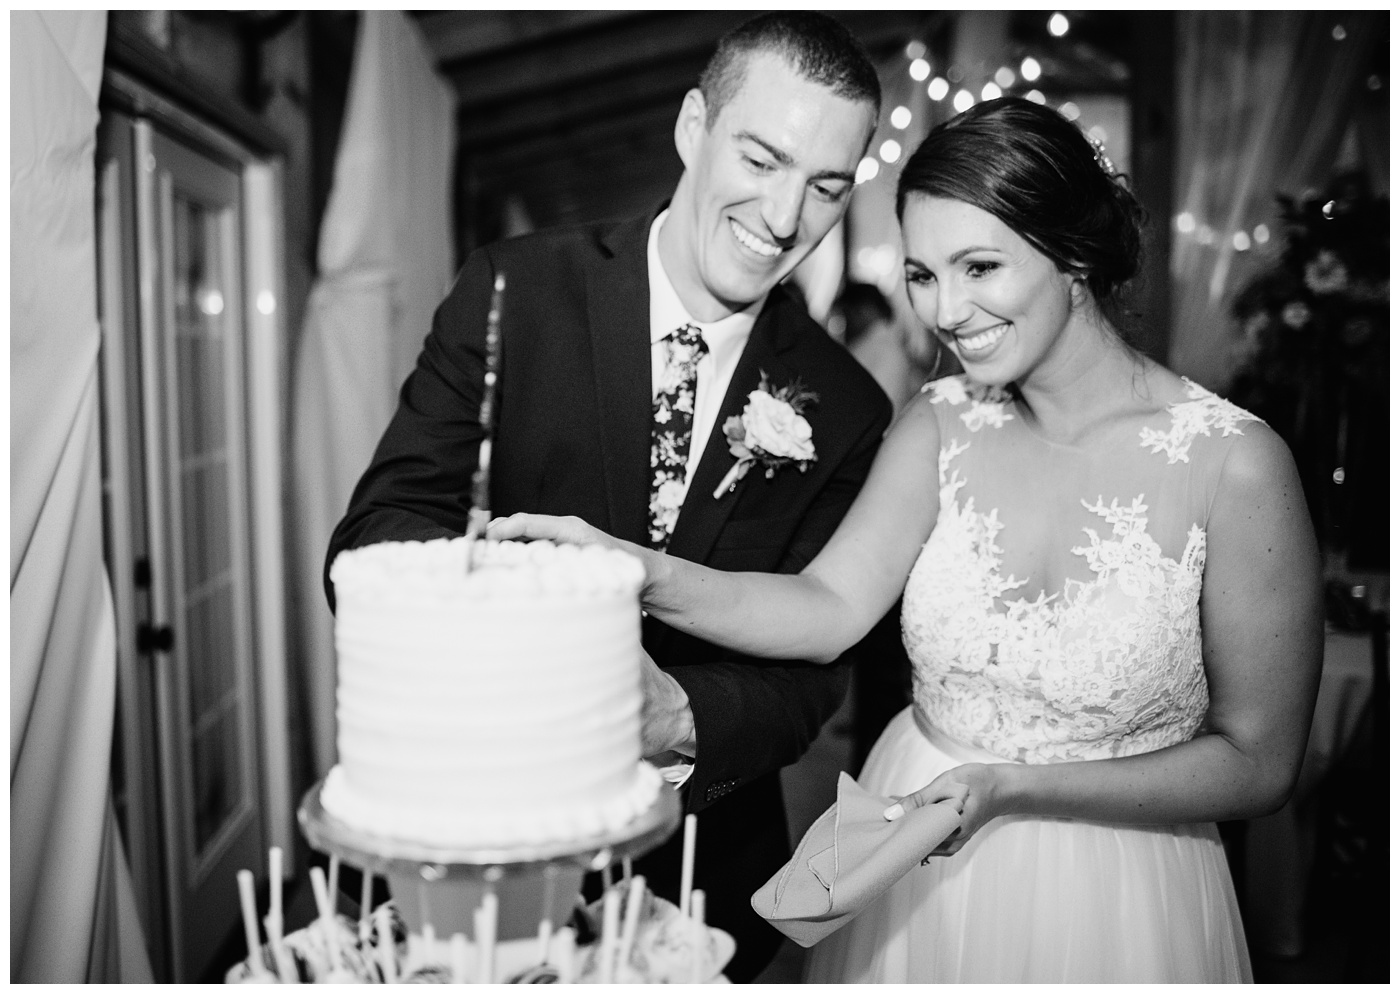 DelFosse Vineyard couple cutting their cake during their reception